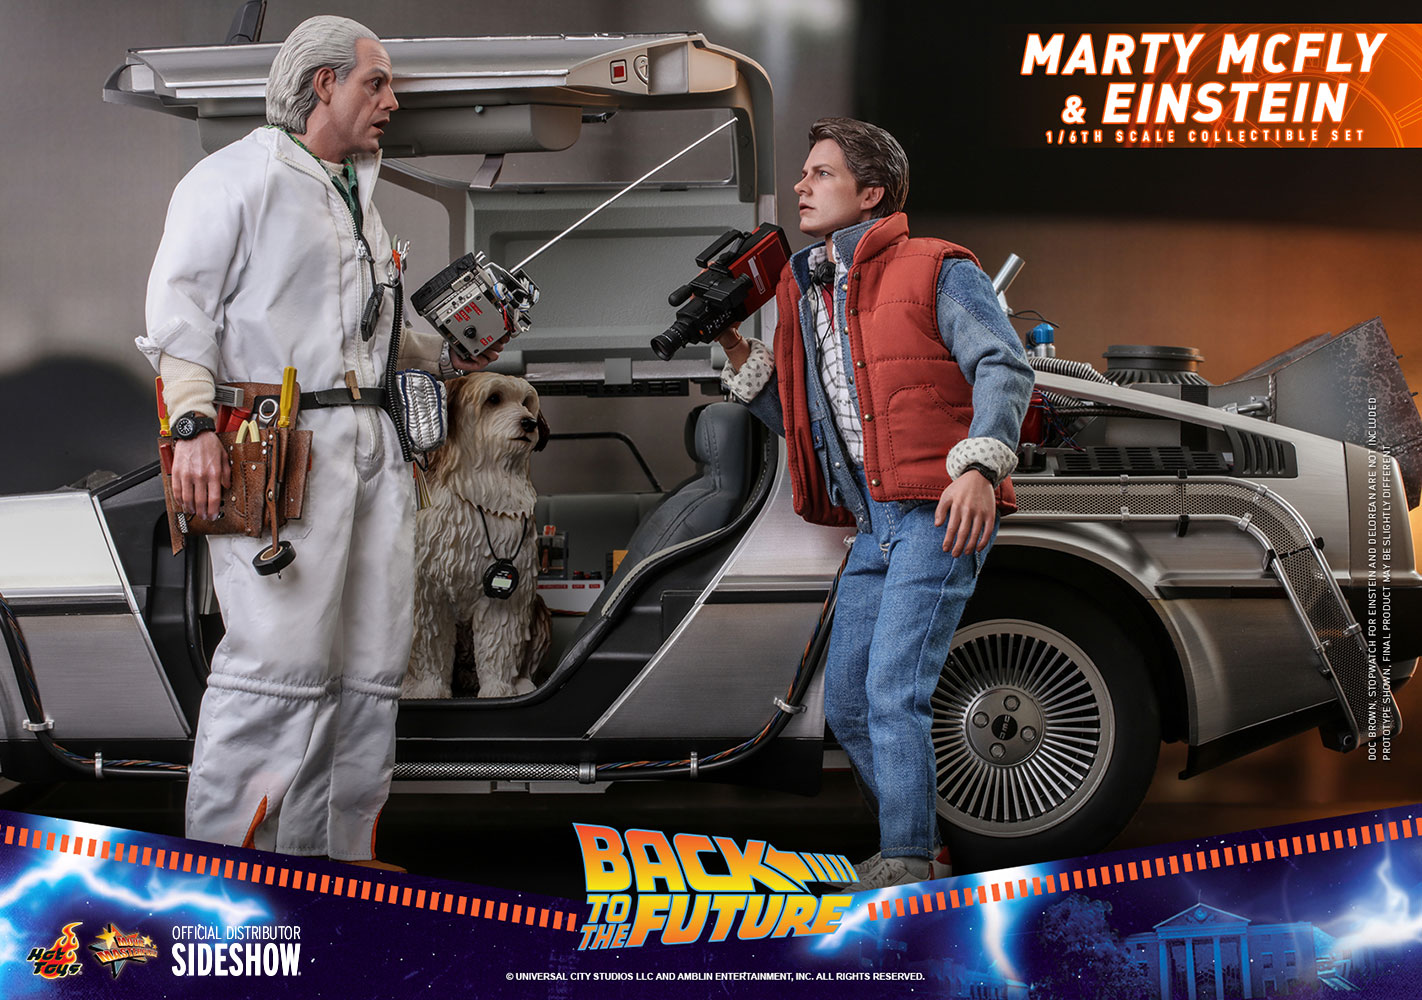 marty-mcfly-and-einstein_back-to-the-future_gallery_6137bd83b383c.jpg